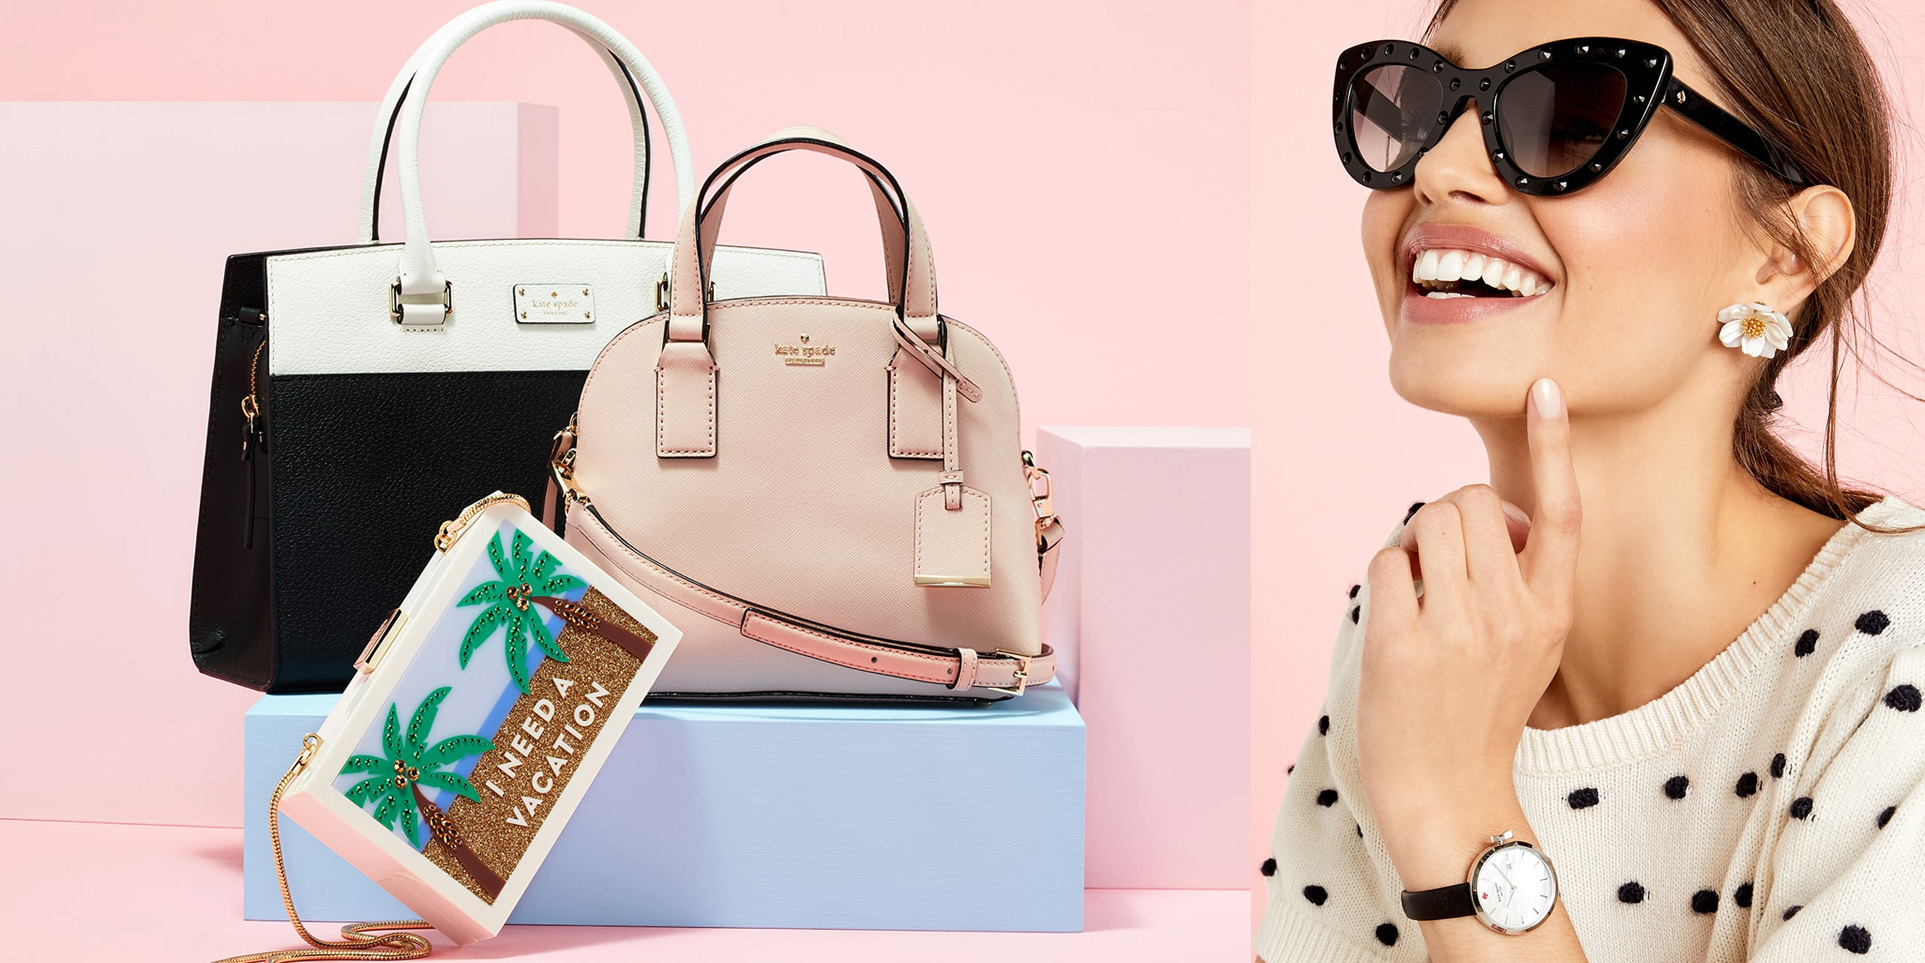 Nordstrom Rack Kate Spade Flash Sale offers handbags, jewelry, shoes & more  from $40